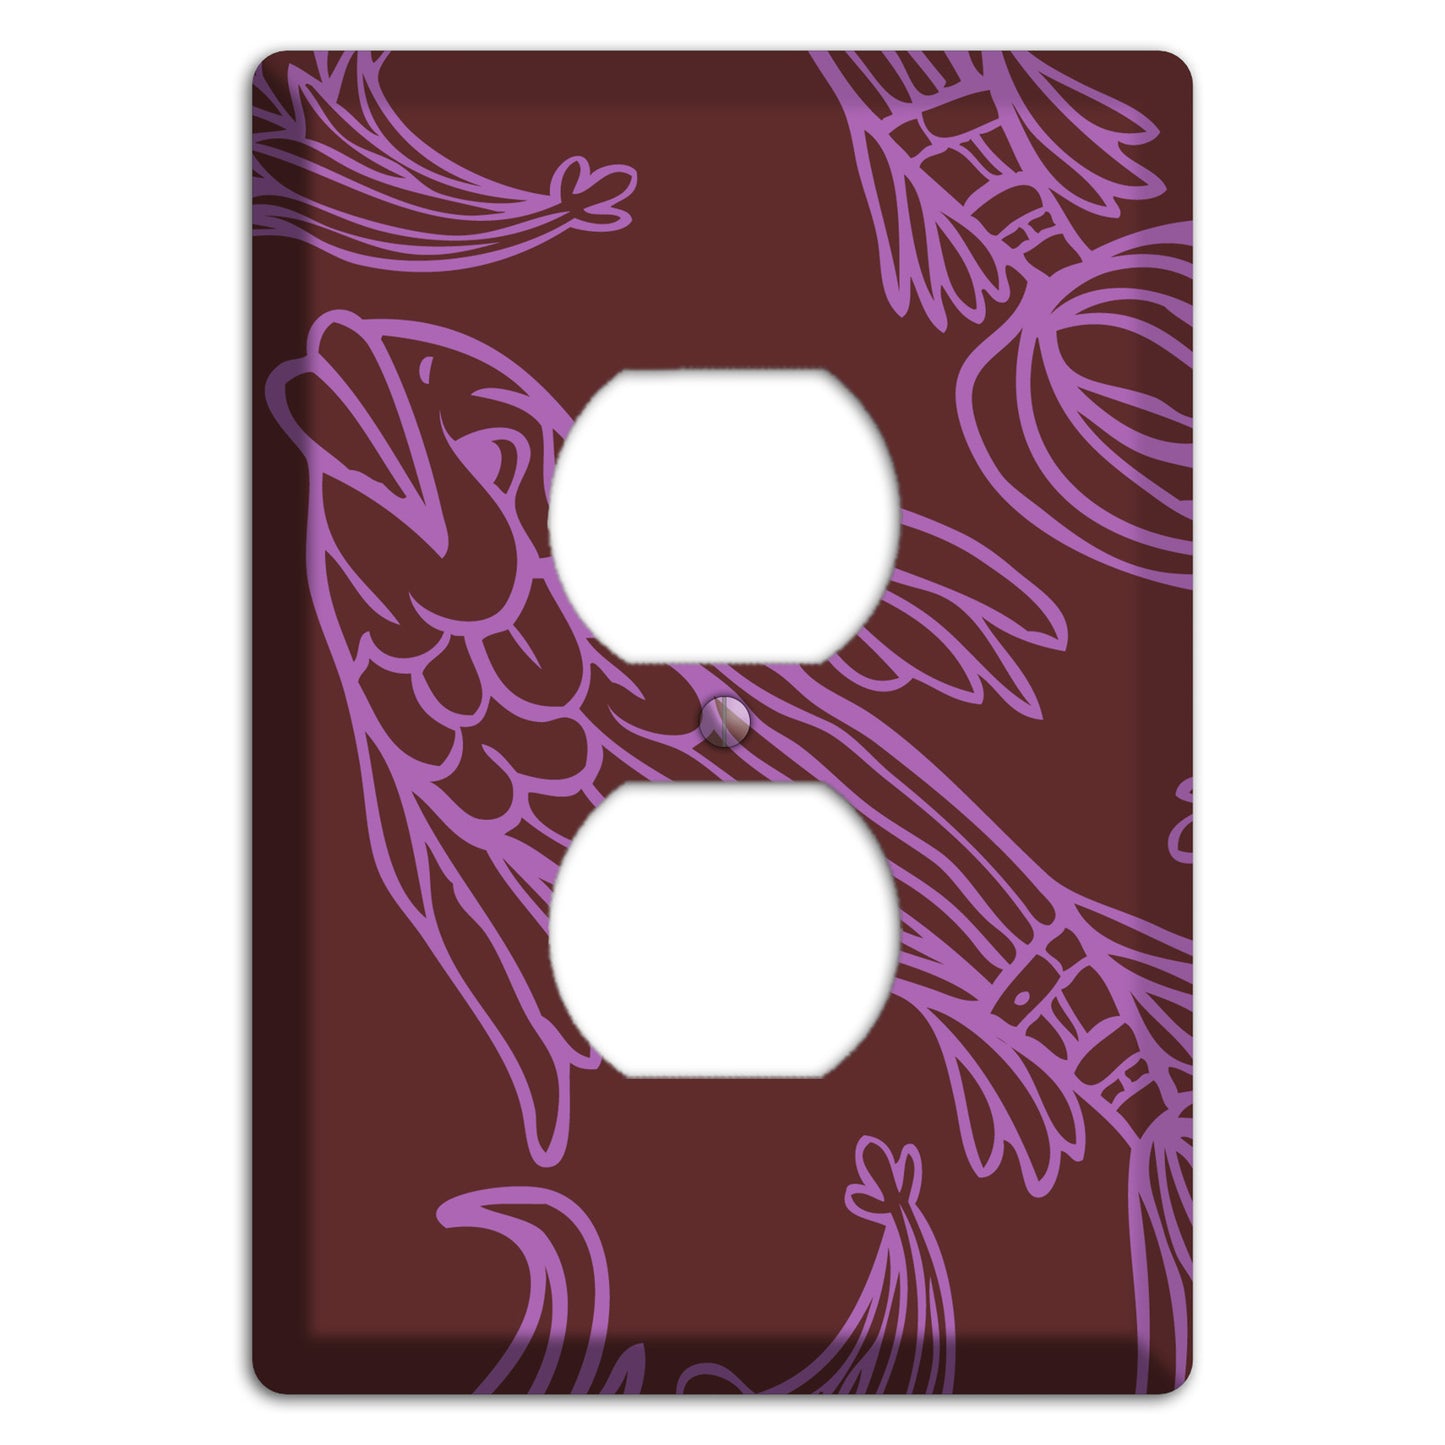 Purple and Pink Koi Duplex Outlet Wallplate